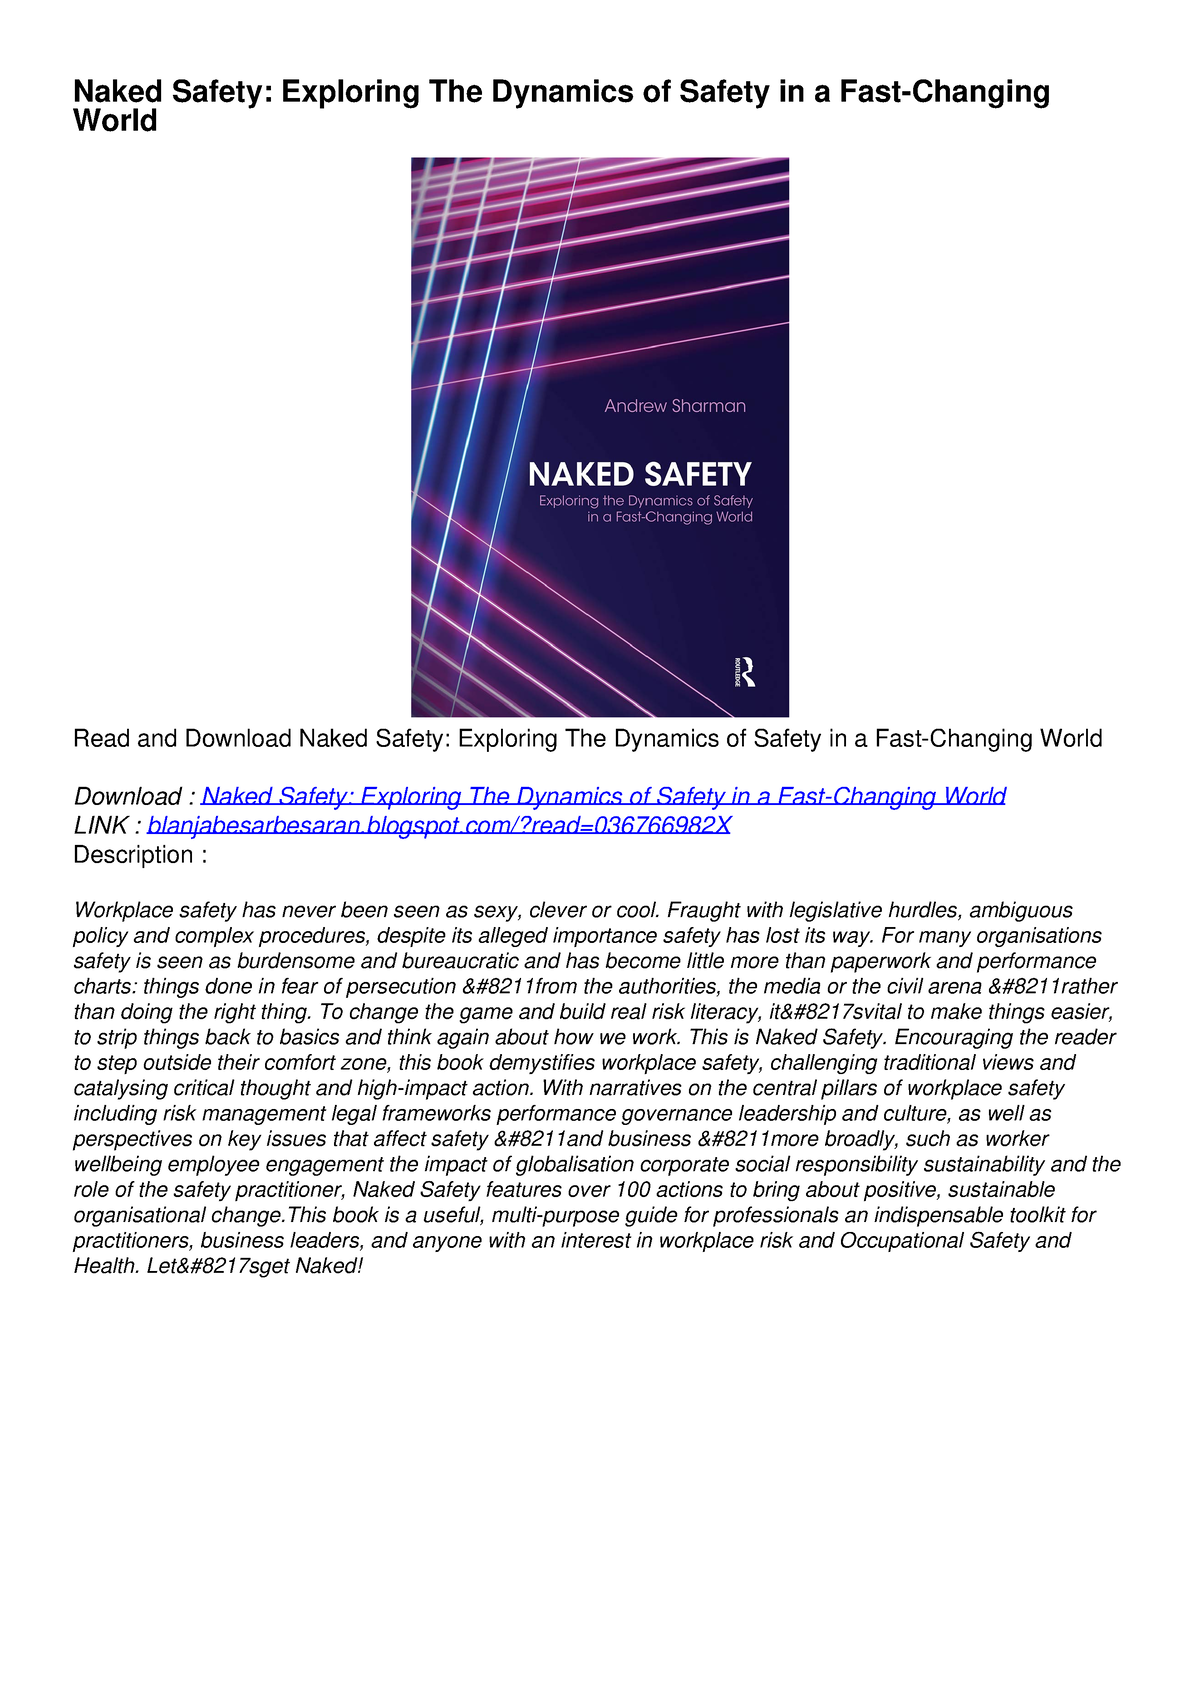 Read Download Naked Safety Exploring The Dynamics Of Safety In A Fast Changing Naked Safety